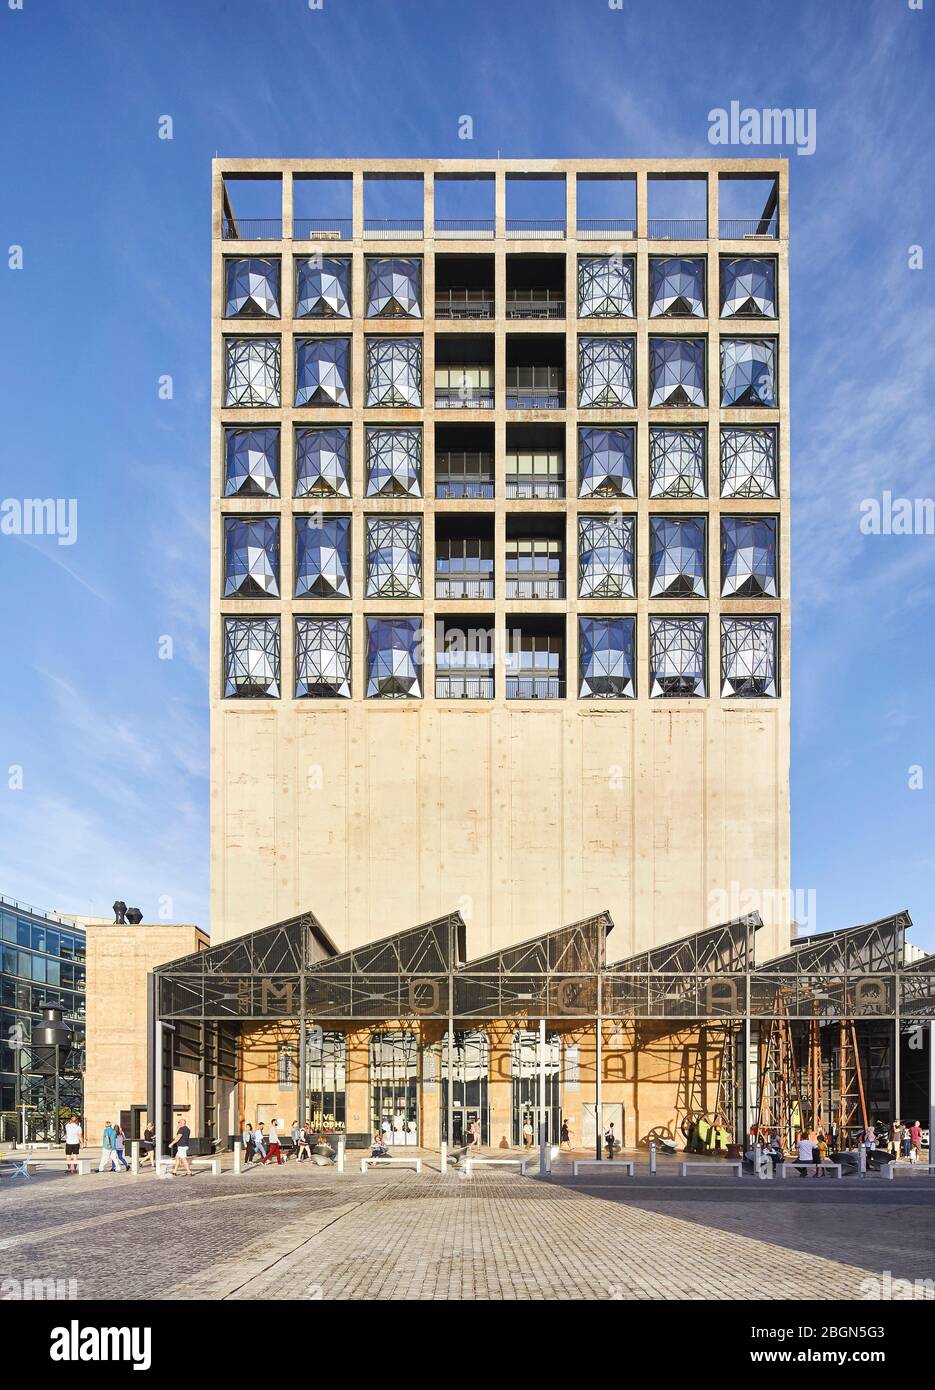 Exterior facade with canopied Track Shed forecourt. Zeitz MOCAA, Cape Town, South Africa. Architect: Heatherwick Studio, 2017. Stock Photo